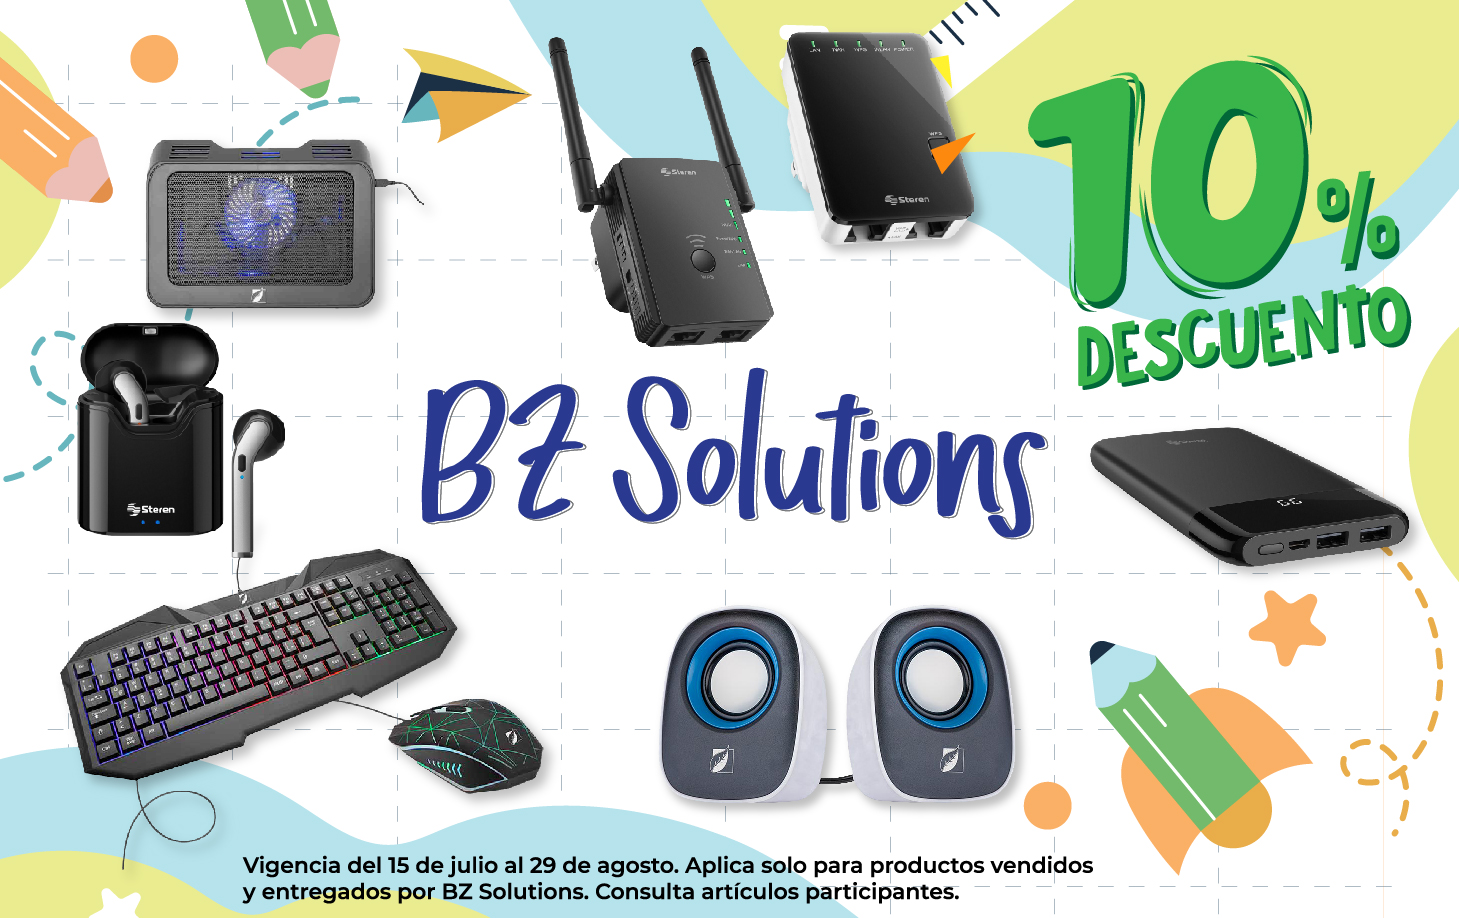 BZ solutions